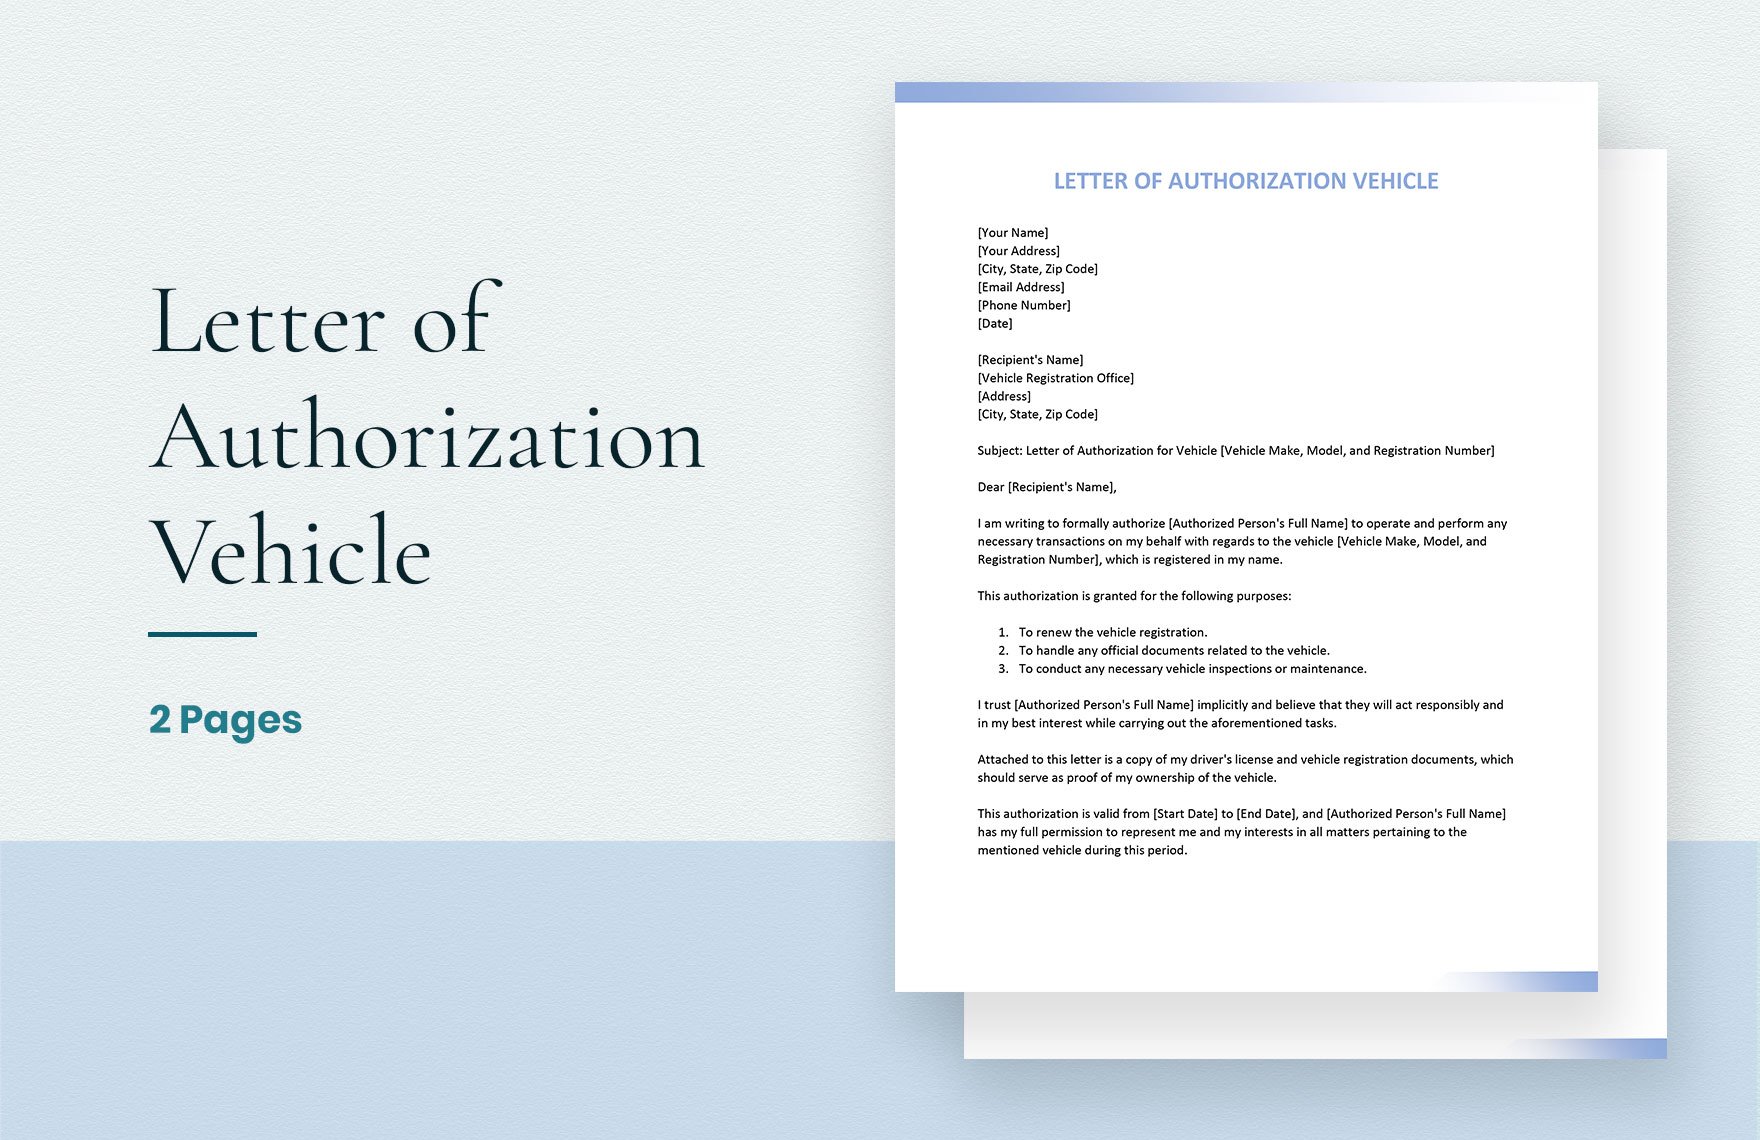 Letter of Authorization Vehicle in Word, Google Docs, Apple Pages